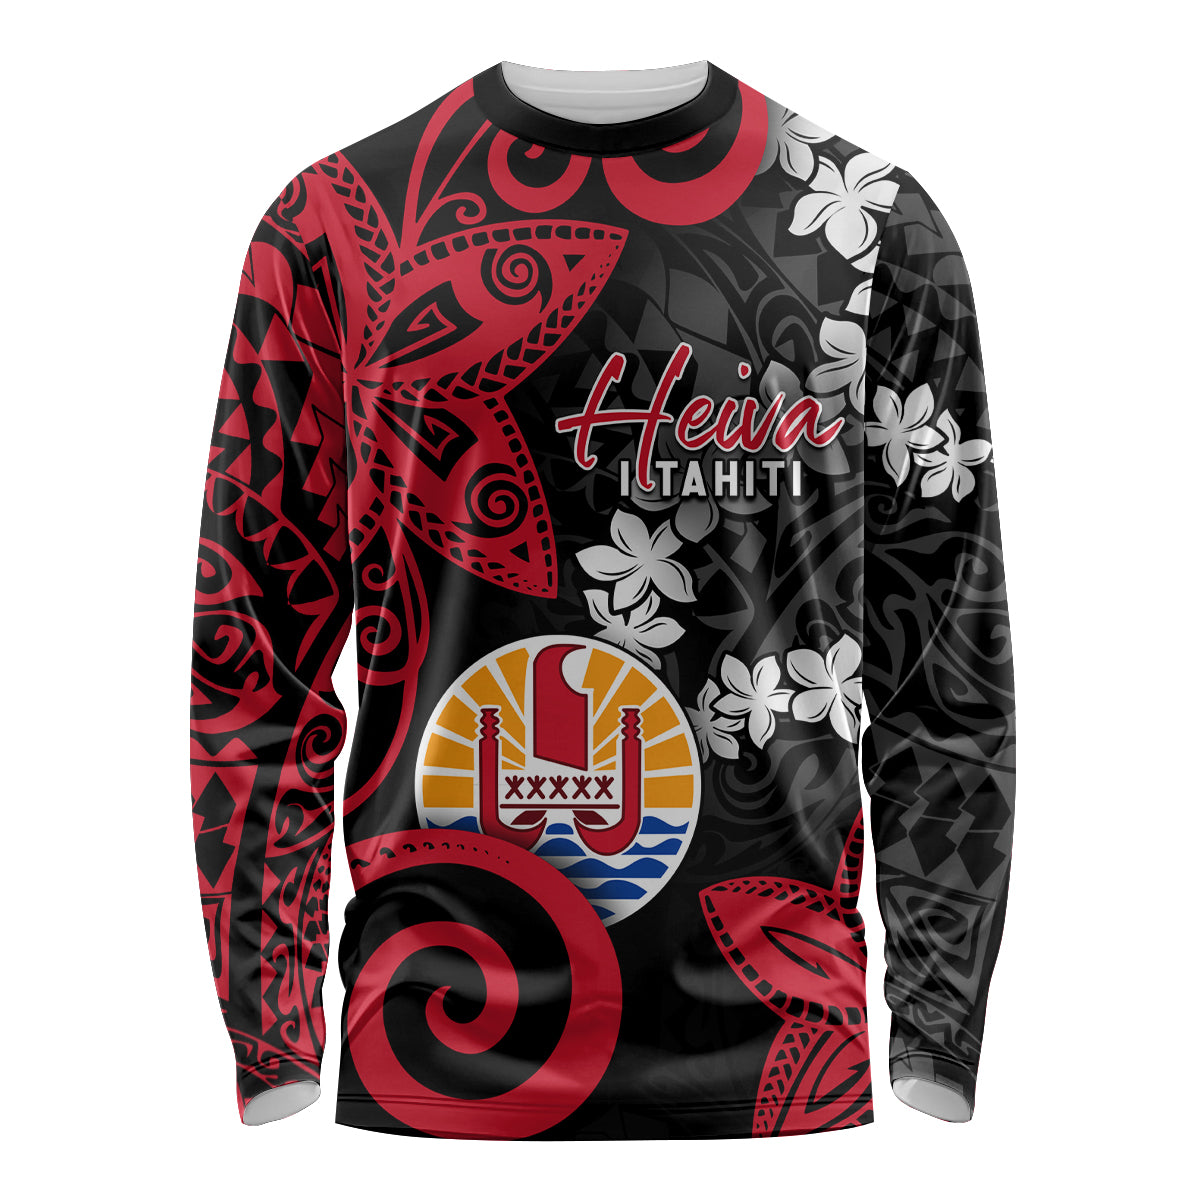 Tahiti Heiva Festival Long Sleeve Shirt Floral Pattern With Coat Of Arms